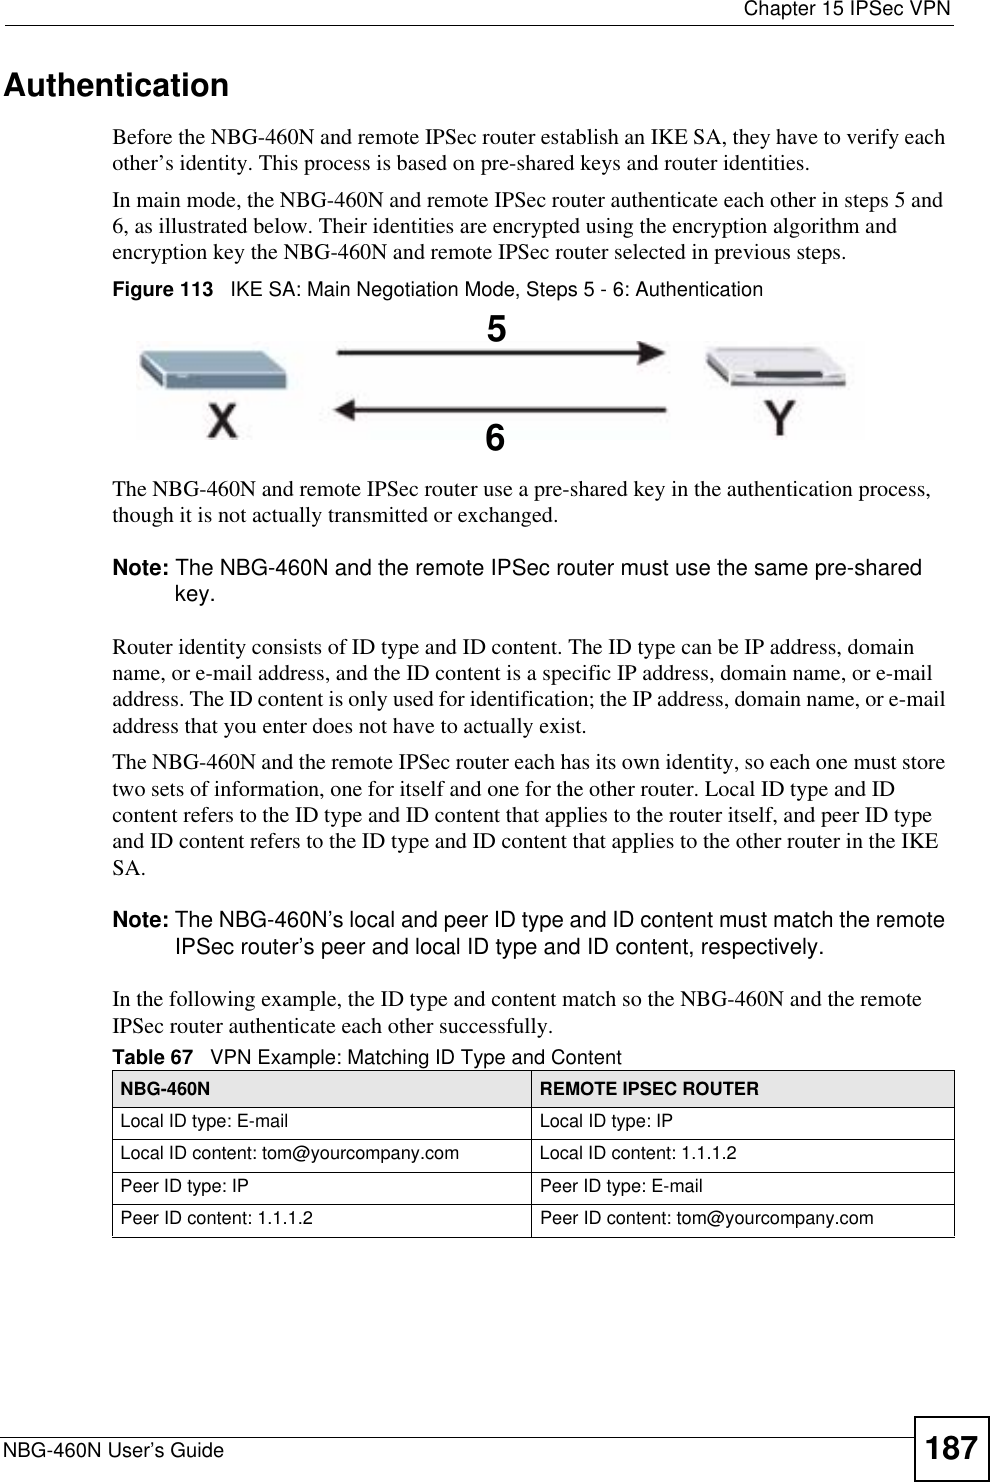  Chapter 15 IPSec VPNNBG-460N User’s Guide 187AuthenticationBefore the NBG-460N and remote IPSec router establish an IKE SA, they have to verify each other’s identity. This process is based on pre-shared keys and router identities.In main mode, the NBG-460N and remote IPSec router authenticate each other in steps 5 and 6, as illustrated below. Their identities are encrypted using the encryption algorithm and encryption key the NBG-460N and remote IPSec router selected in previous steps.Figure 113   IKE SA: Main Negotiation Mode, Steps 5 - 6: AuthenticationThe NBG-460N and remote IPSec router use a pre-shared key in the authentication process, though it is not actually transmitted or exchanged.Note: The NBG-460N and the remote IPSec router must use the same pre-shared key.Router identity consists of ID type and ID content. The ID type can be IP address, domain name, or e-mail address, and the ID content is a specific IP address, domain name, or e-mail address. The ID content is only used for identification; the IP address, domain name, or e-mail address that you enter does not have to actually exist.The NBG-460N and the remote IPSec router each has its own identity, so each one must store two sets of information, one for itself and one for the other router. Local ID type and ID content refers to the ID type and ID content that applies to the router itself, and peer ID type and ID content refers to the ID type and ID content that applies to the other router in the IKE SA.Note: The NBG-460N’s local and peer ID type and ID content must match the remote IPSec router’s peer and local ID type and ID content, respectively.In the following example, the ID type and content match so the NBG-460N and the remote IPSec router authenticate each other successfully.Table 67   VPN Example: Matching ID Type and ContentNBG-460N REMOTE IPSEC ROUTERLocal ID type: E-mail Local ID type: IPLocal ID content: tom@yourcompany.com Local ID content: 1.1.1.2Peer ID type: IP Peer ID type: E-mailPeer ID content: 1.1.1.2 Peer ID content: tom@yourcompany.com56